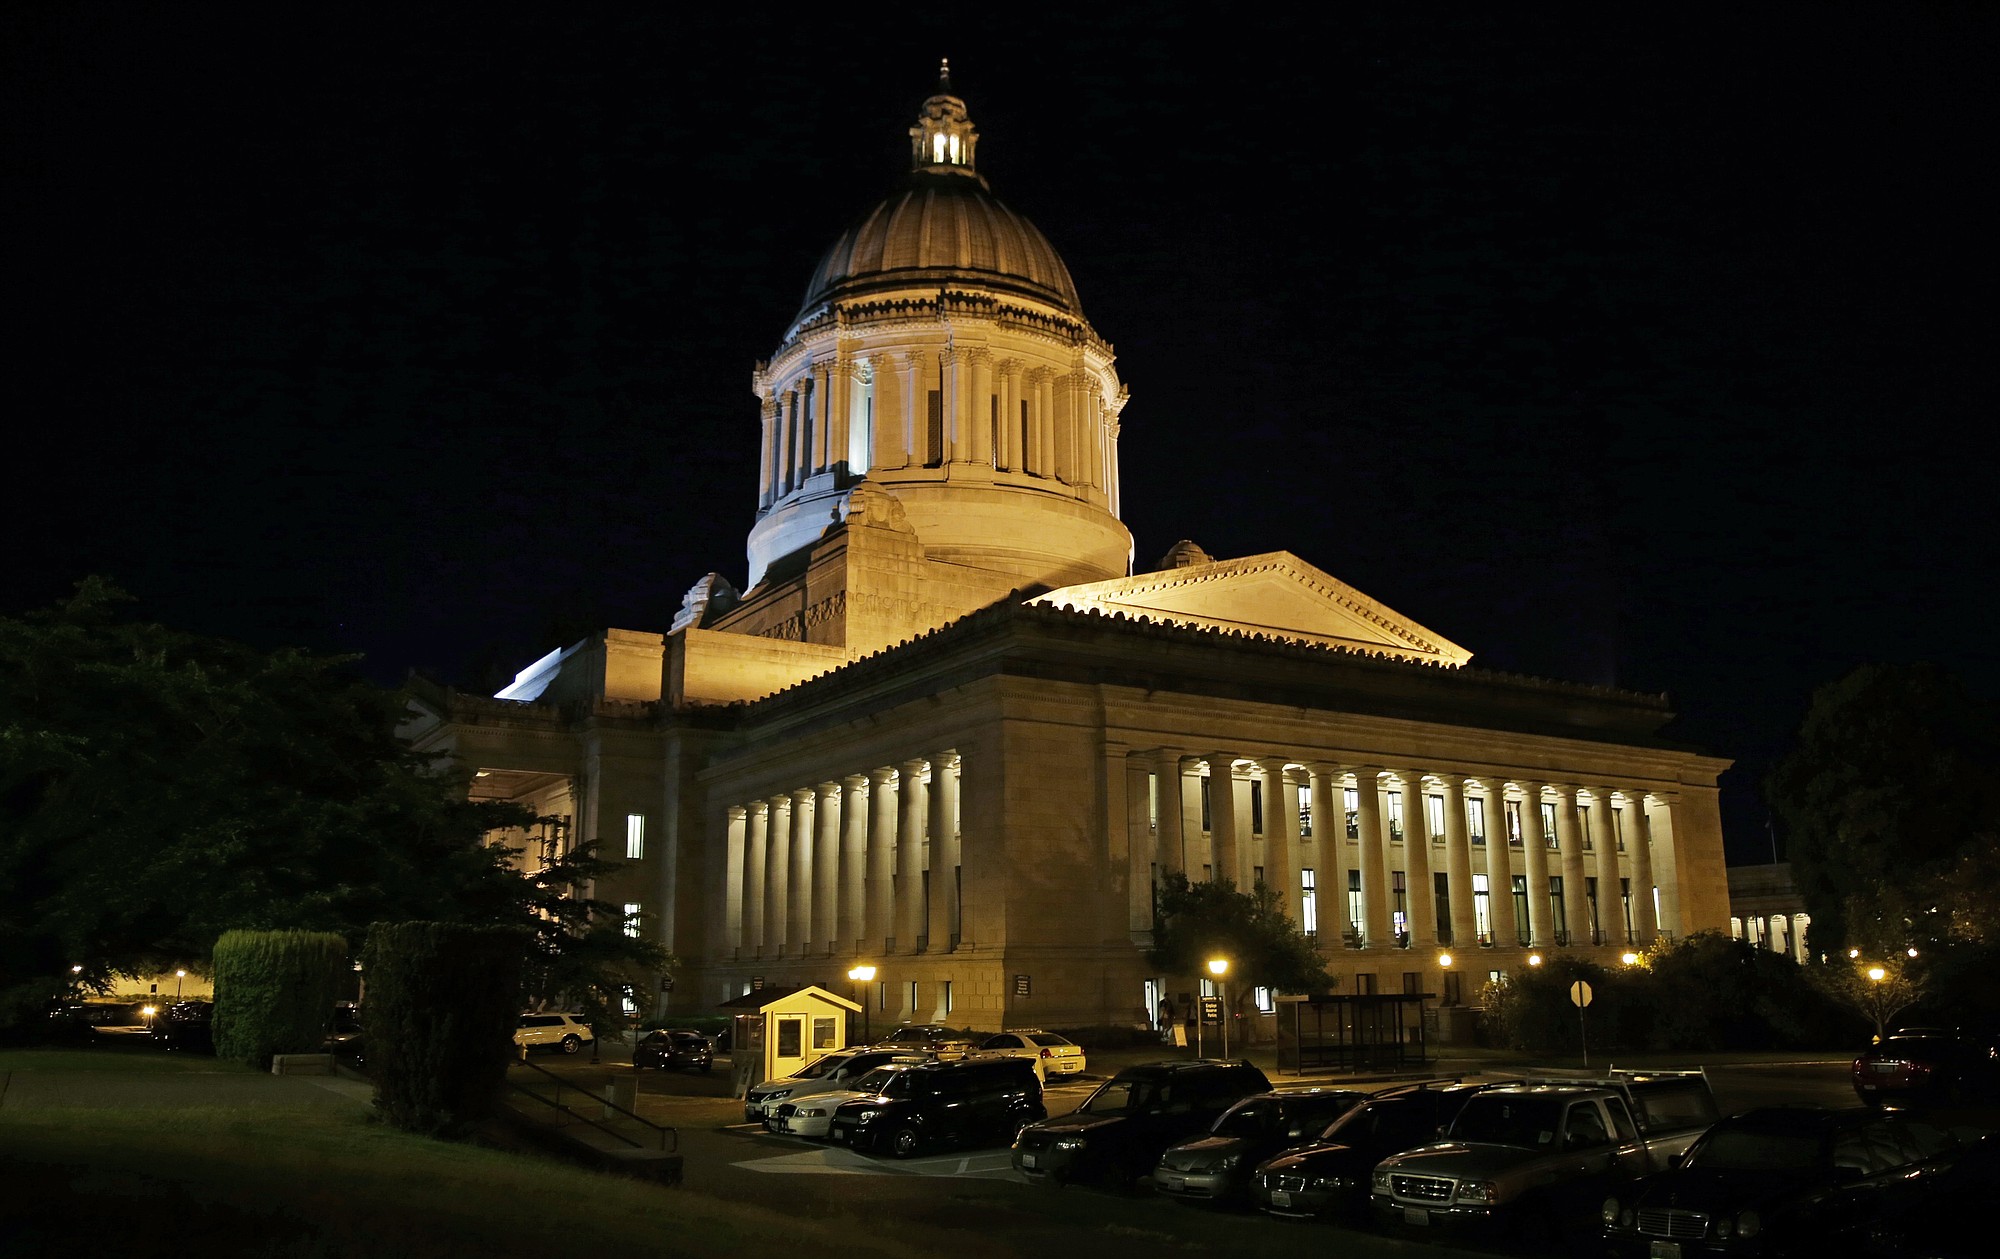 Vehicles remain parked outside the Legislative Building just after midnight in Olympia as Tuesday's session continued into the night.